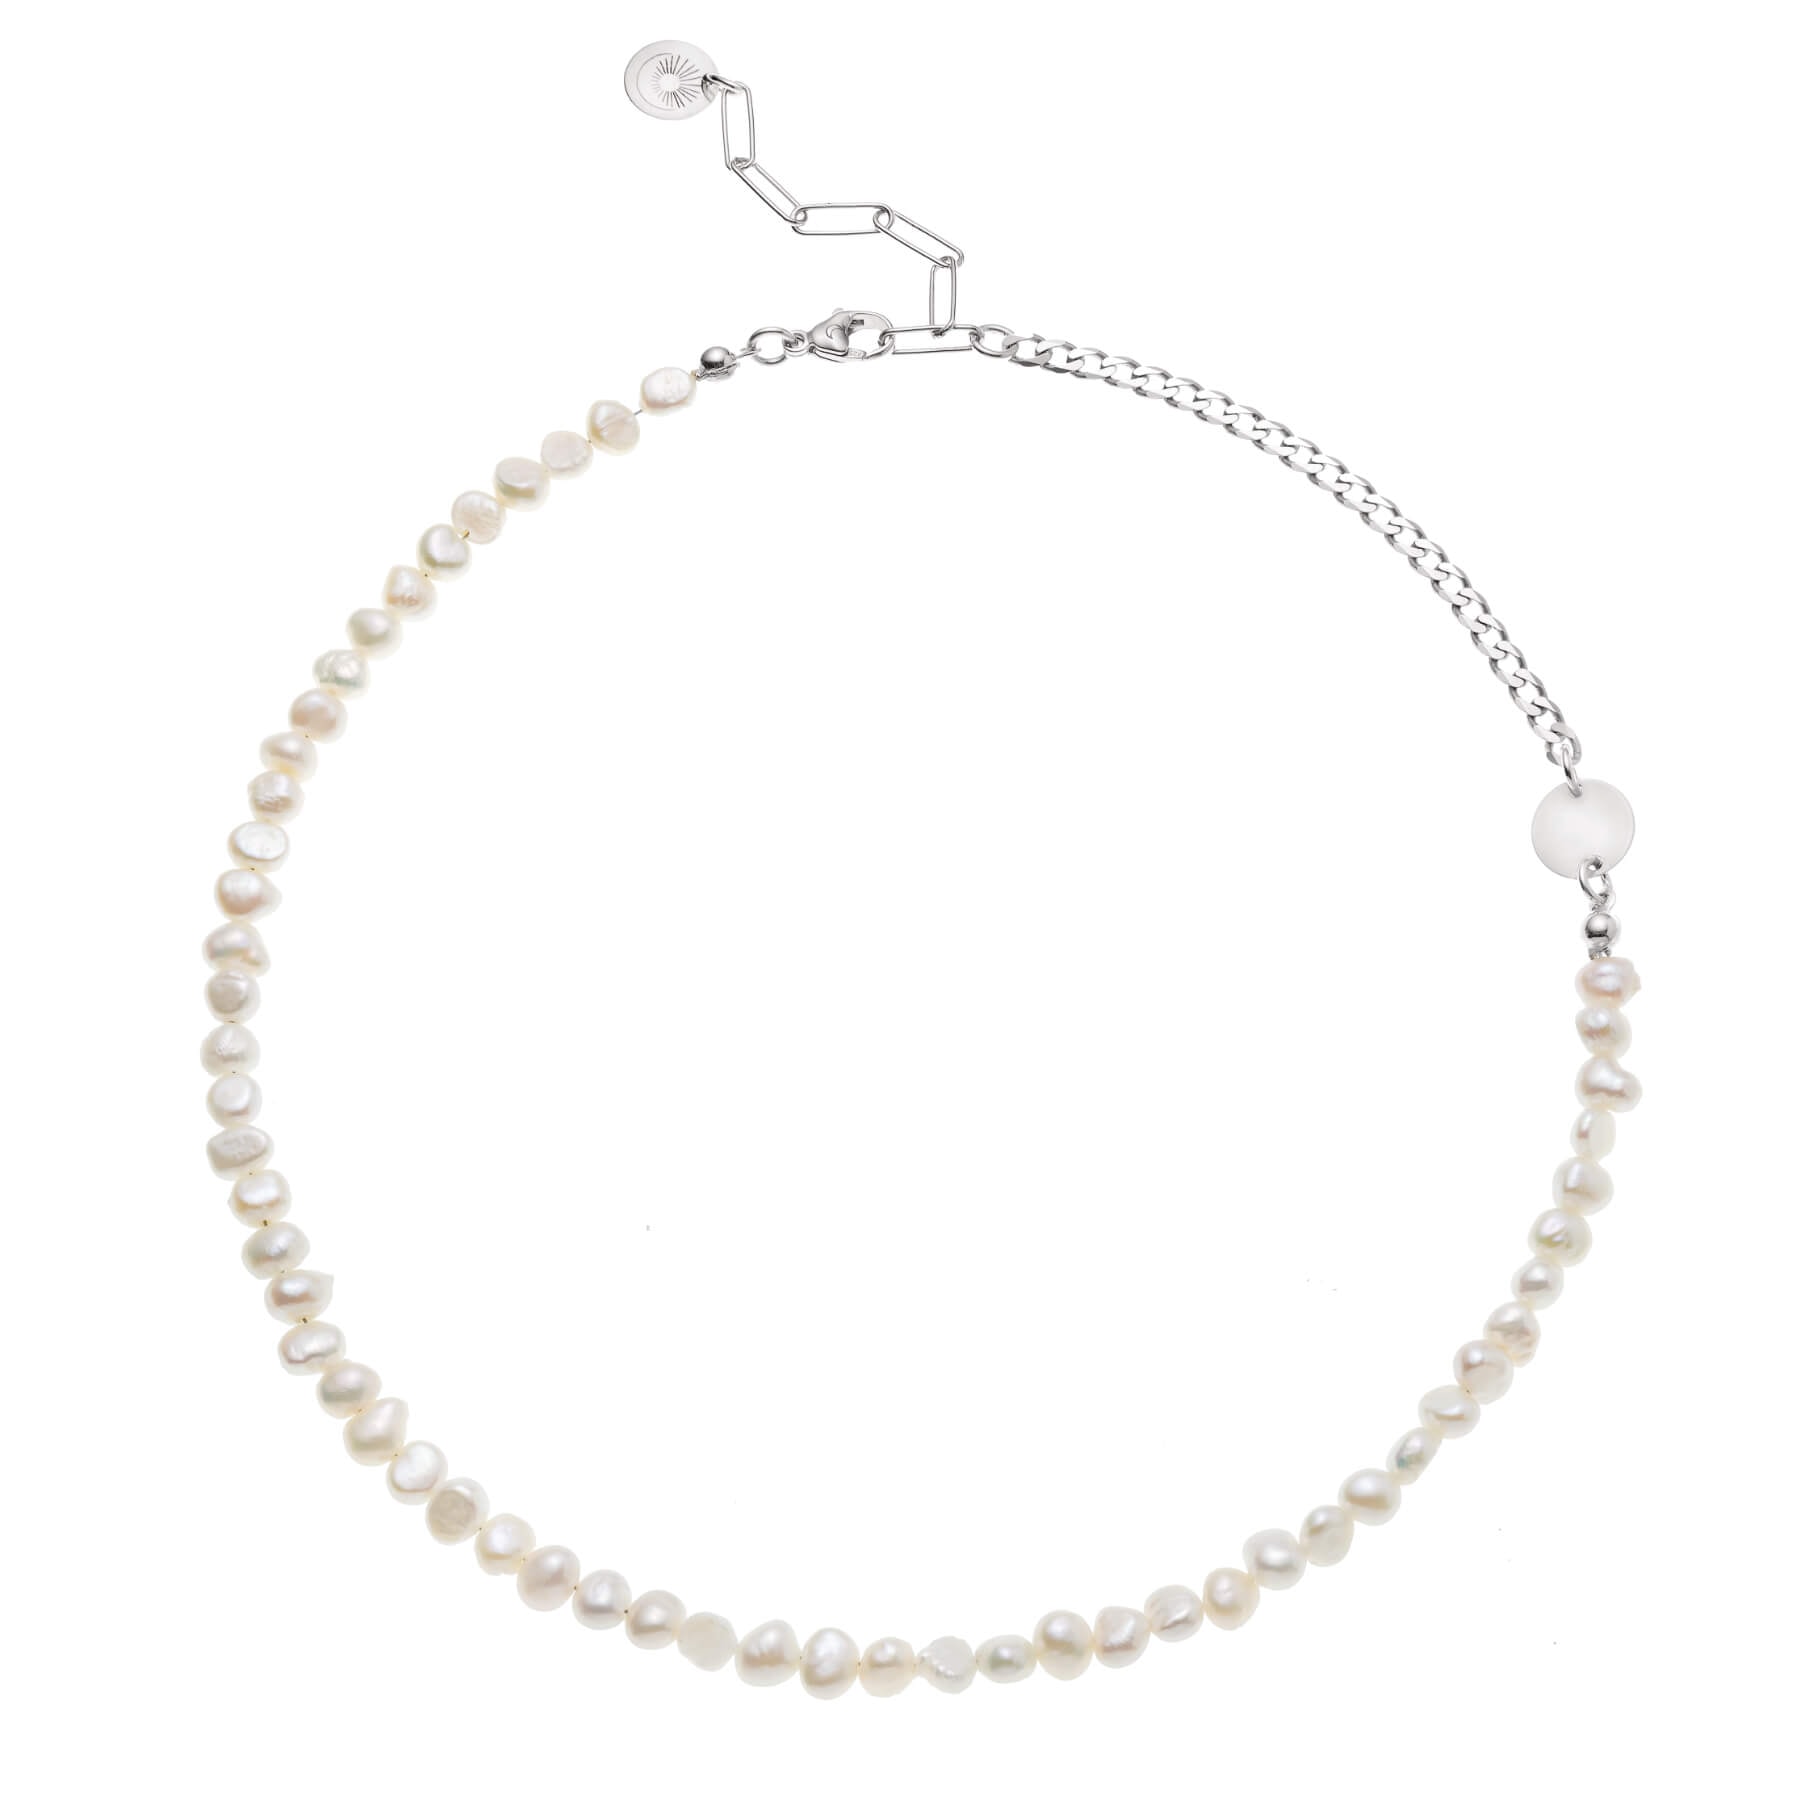 Necklace made of irregular pearls with a chain on white background.